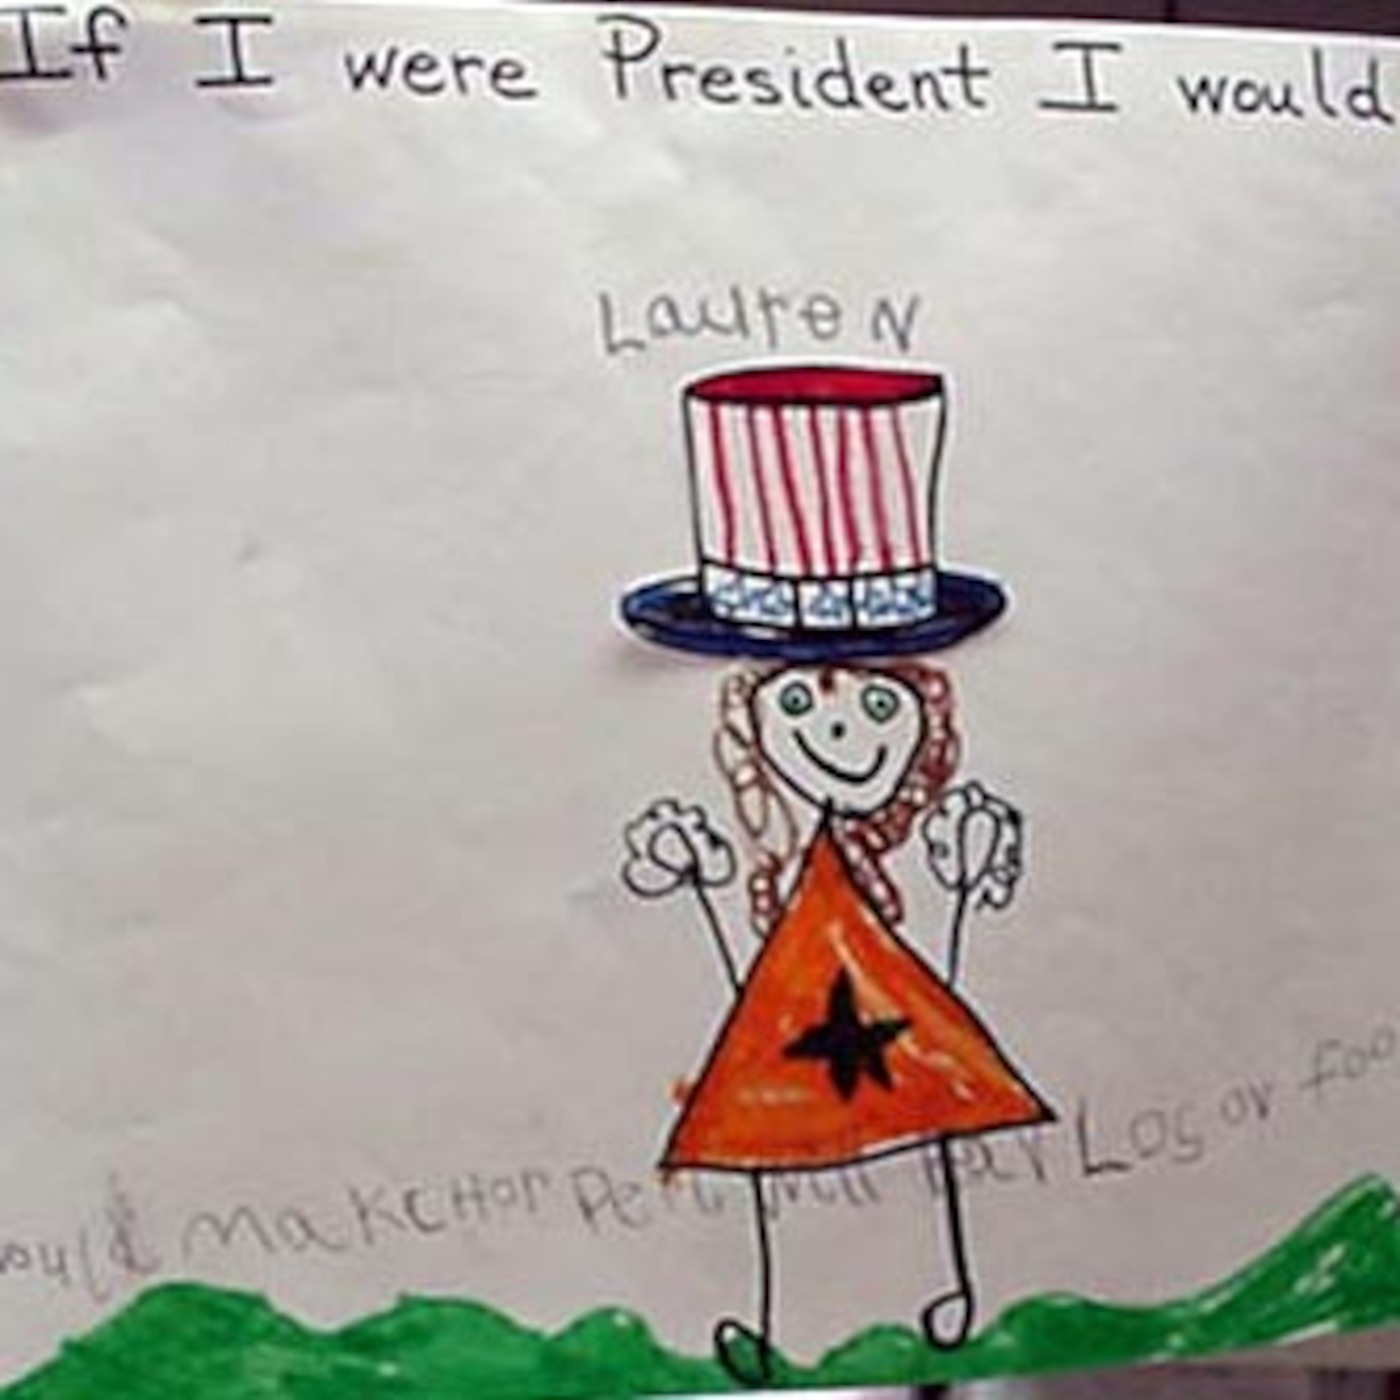 If I was President....